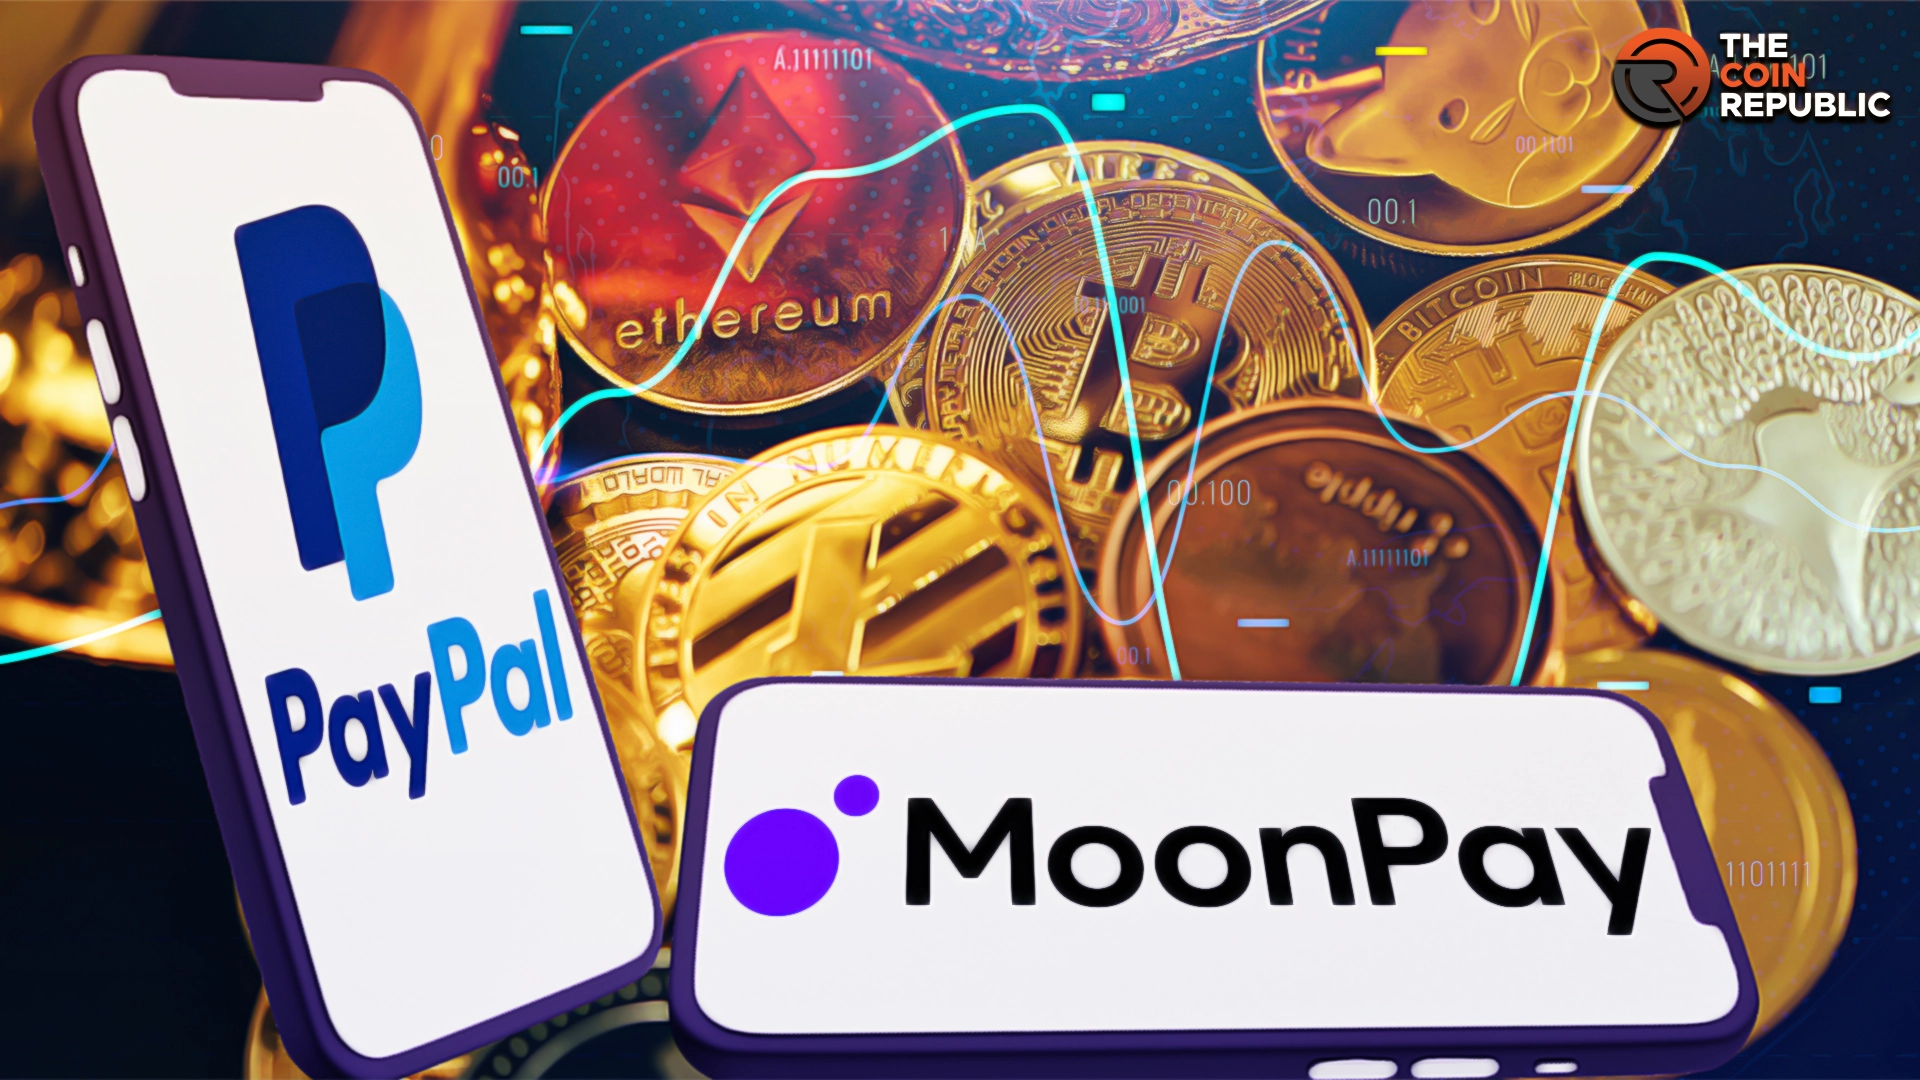 PayPal Users Can Now Purchase Cryptocurrency Using MoonPay